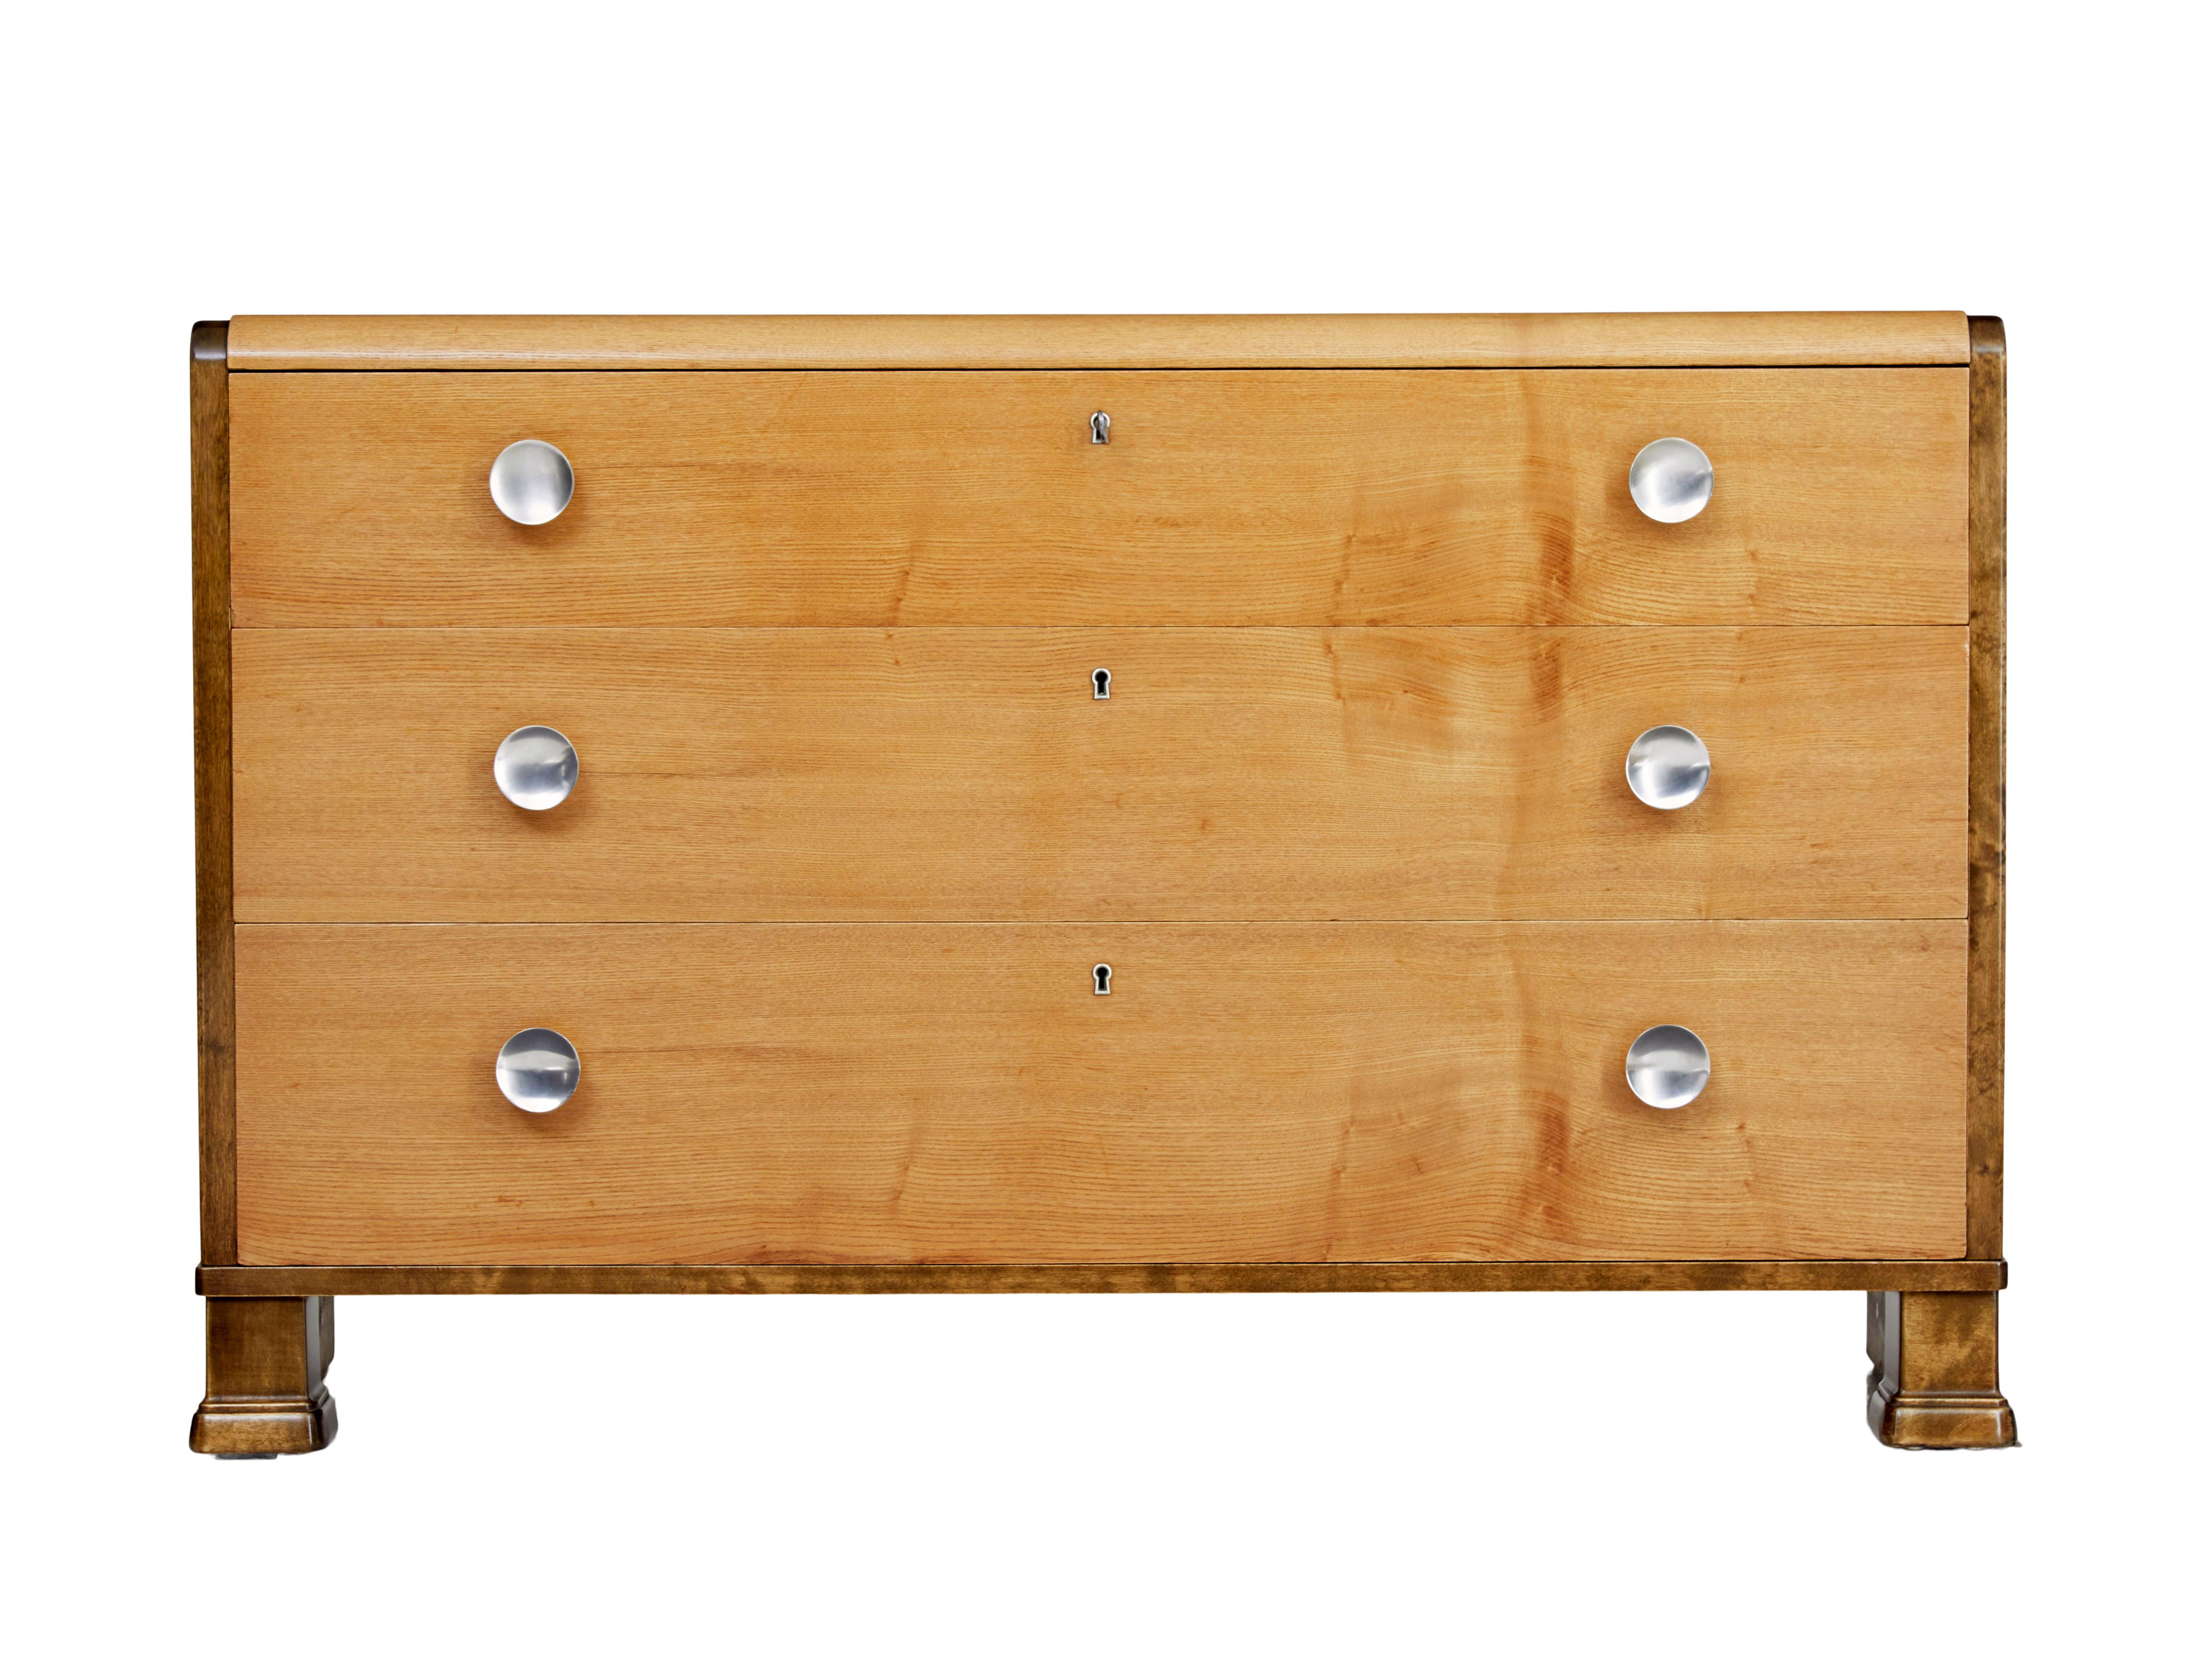 Mid-20th Century elm and birch Scandinavian chest of drawers circa 1960.

fine quality chest of drawers. Fitted with 3 graduating drawers veneered in elm which also covers the top. Dark stained birch sides which flow down to the sledge